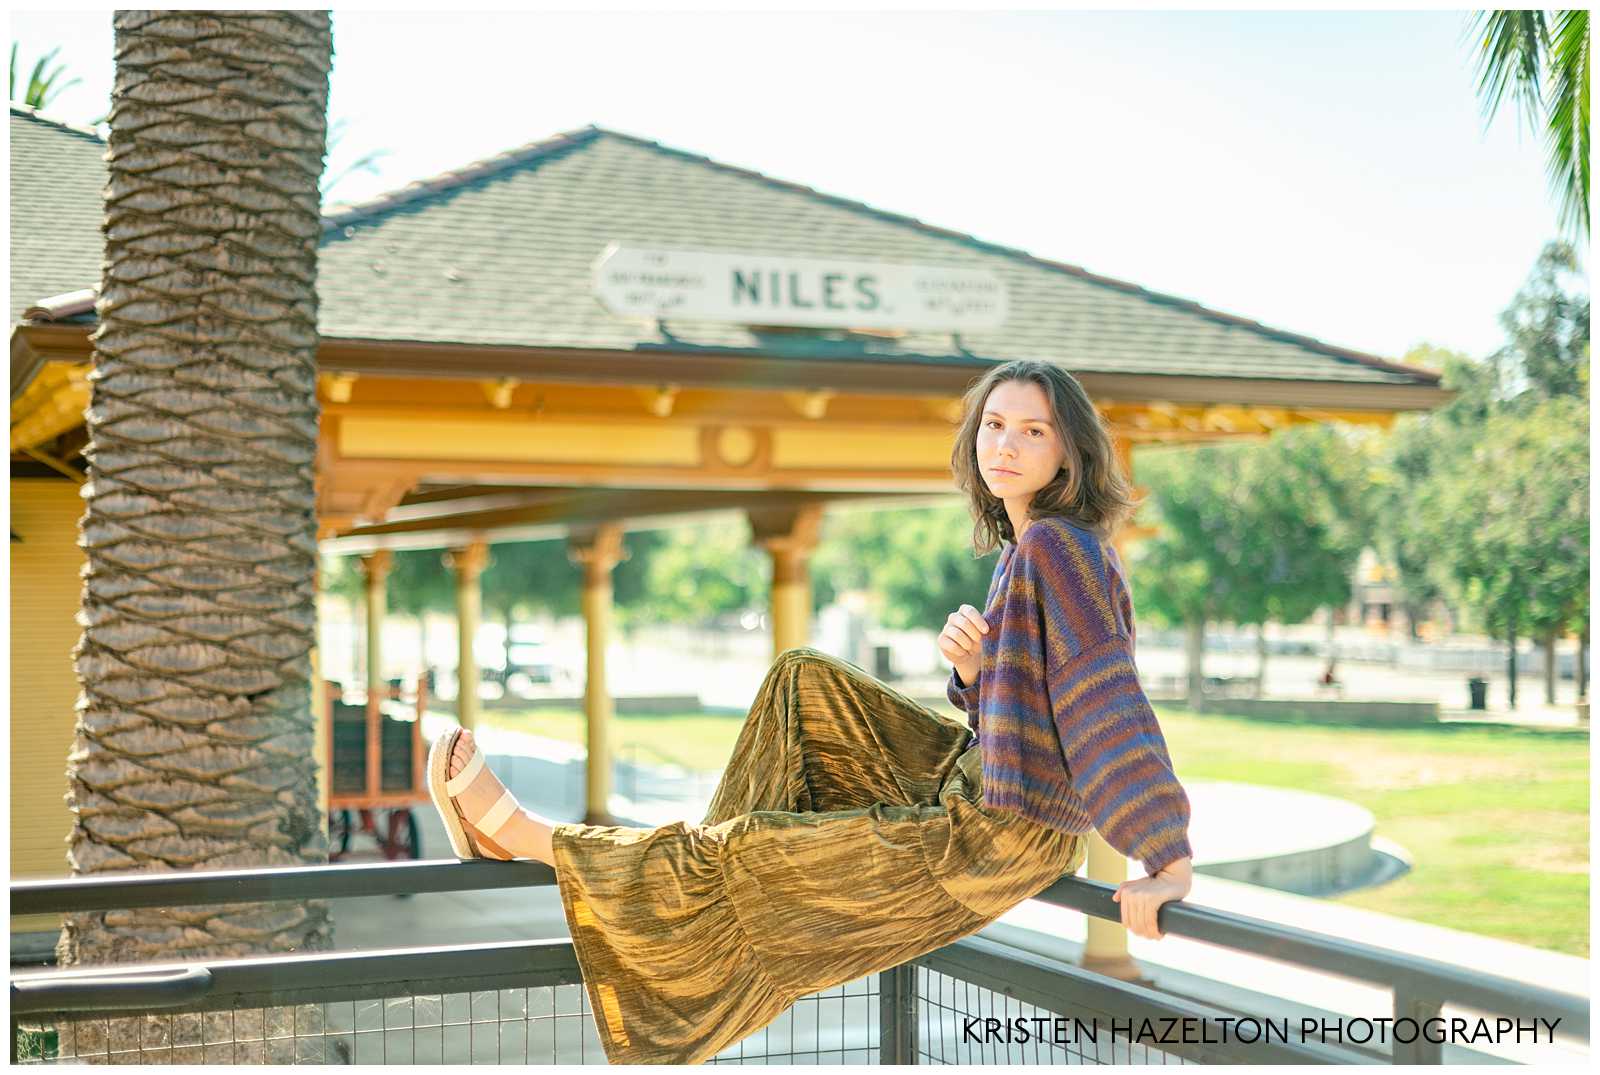 Girl wearing a striped cardigan and yellow velvet pants seated on a railing at a train station in Niles, CA